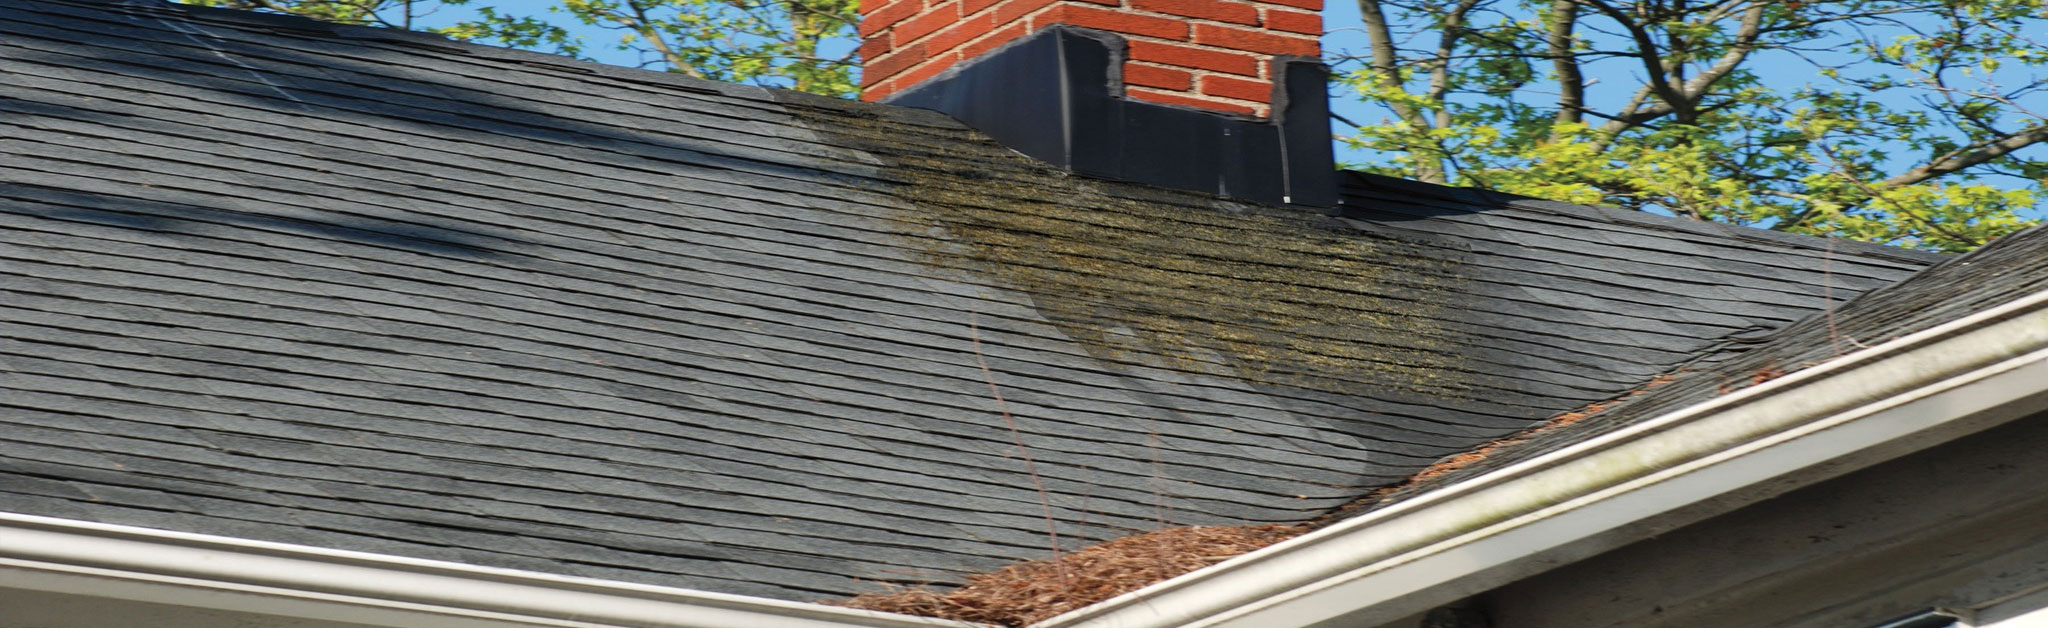 CCC Roofing Images